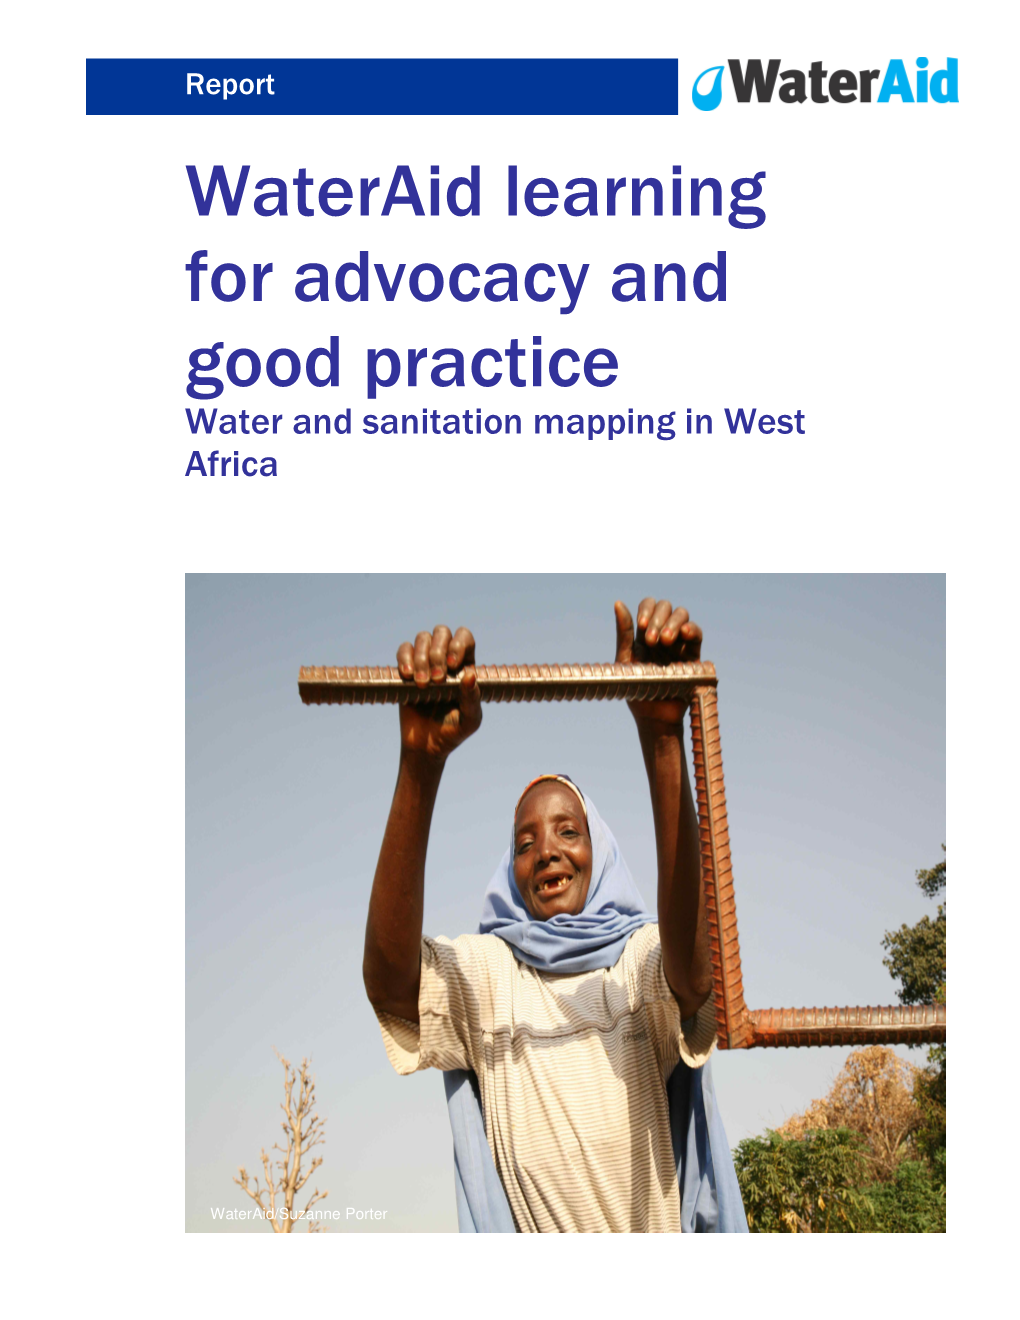 Water and Sanitation Mapping in West Africa